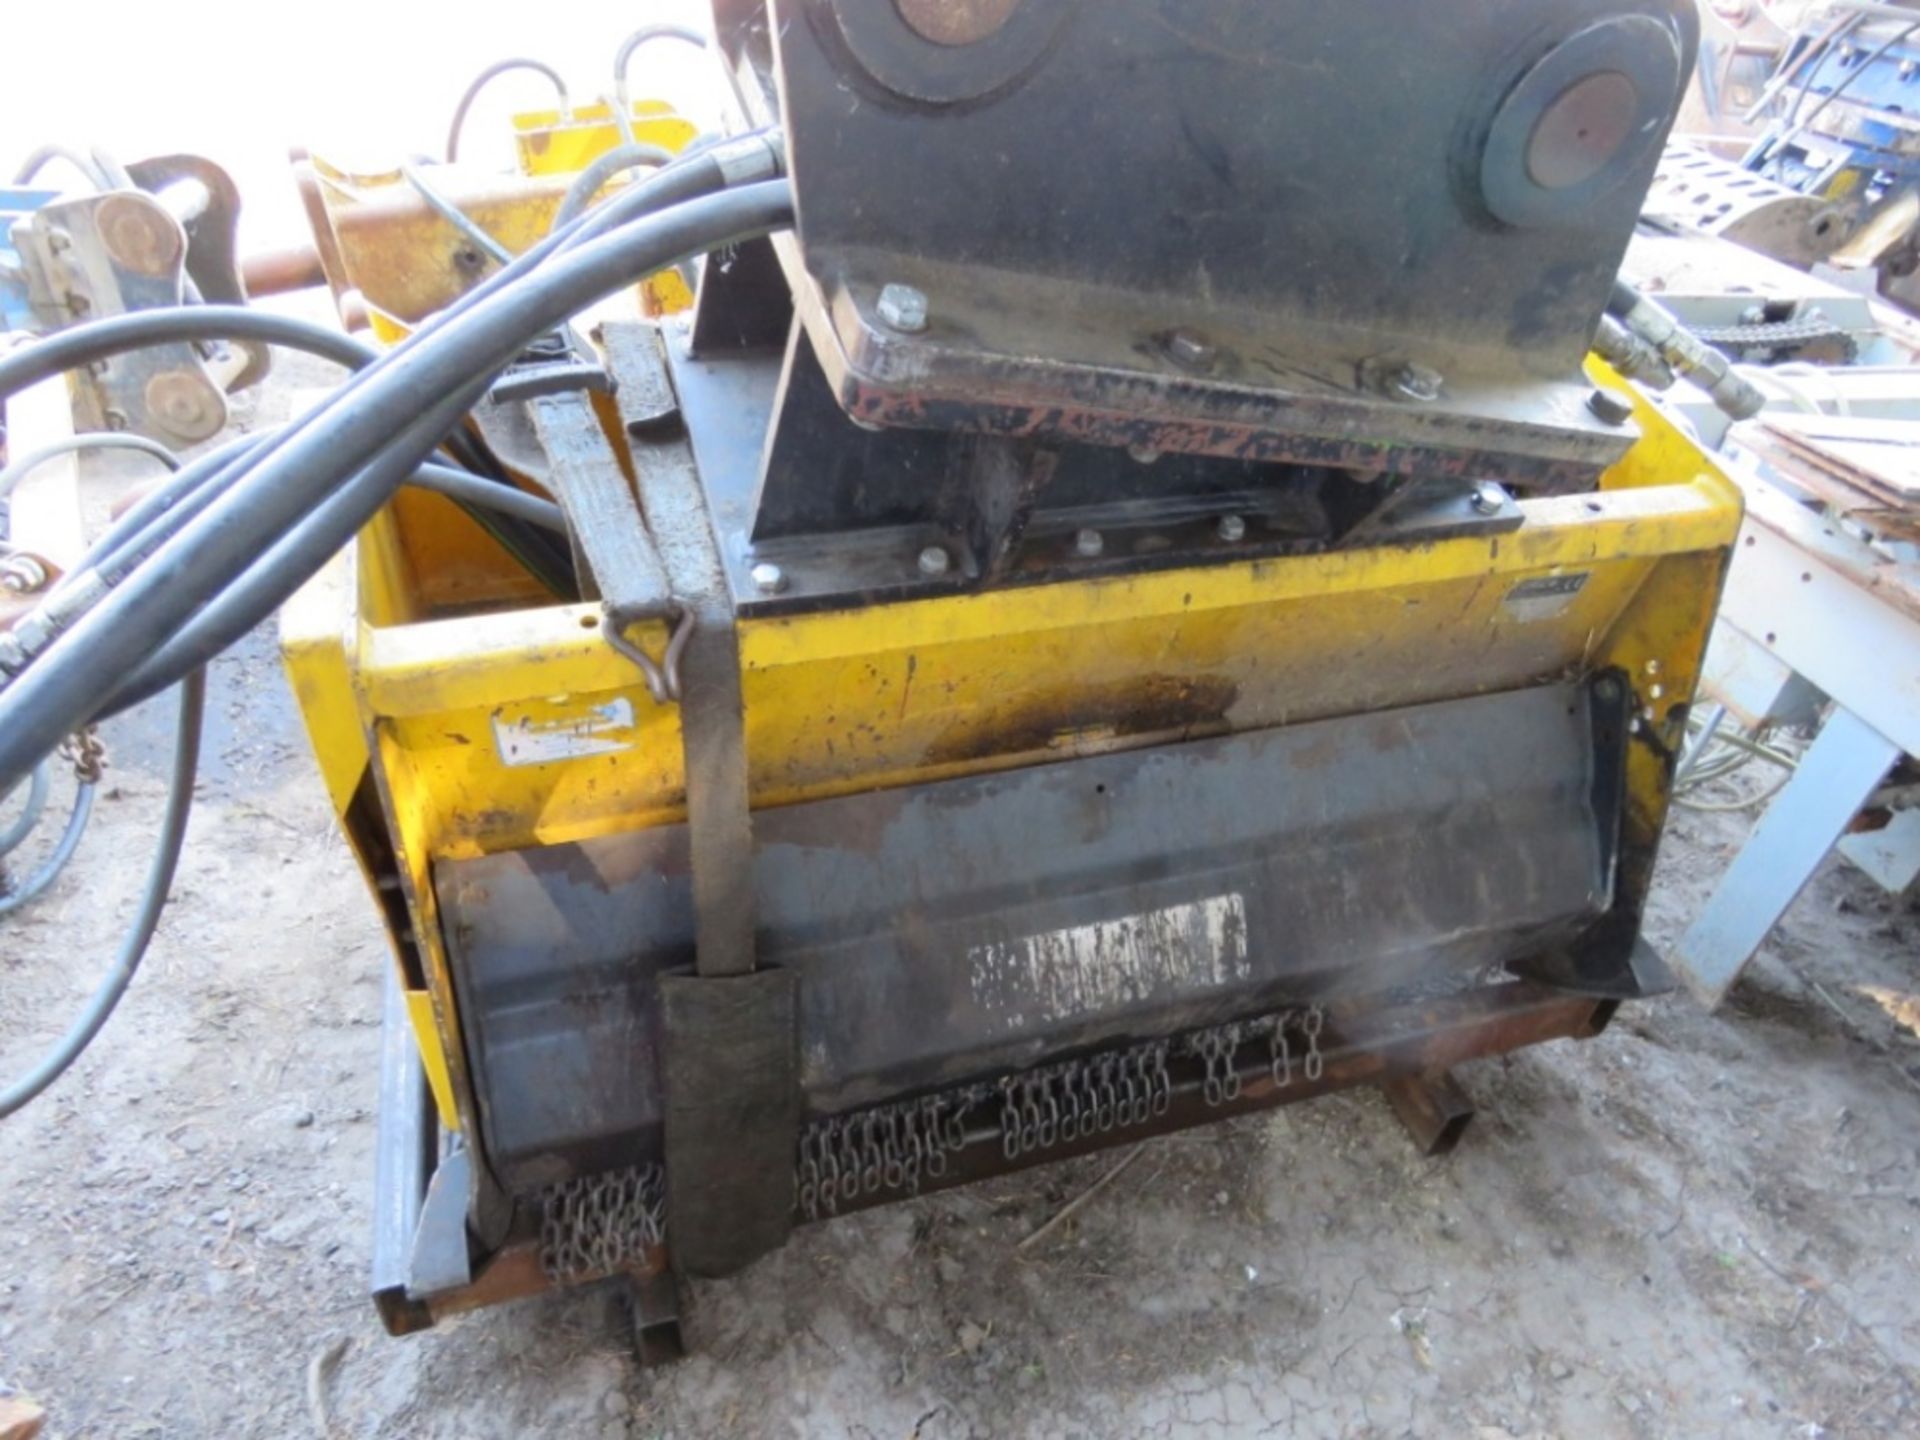 FEMAC EXCAVATOR MOUNTED HEAVY DUTY FLAIL HEAD ON 80MM PINS. UNTESTED, CONDITION UNKNOWN. - Image 4 of 10